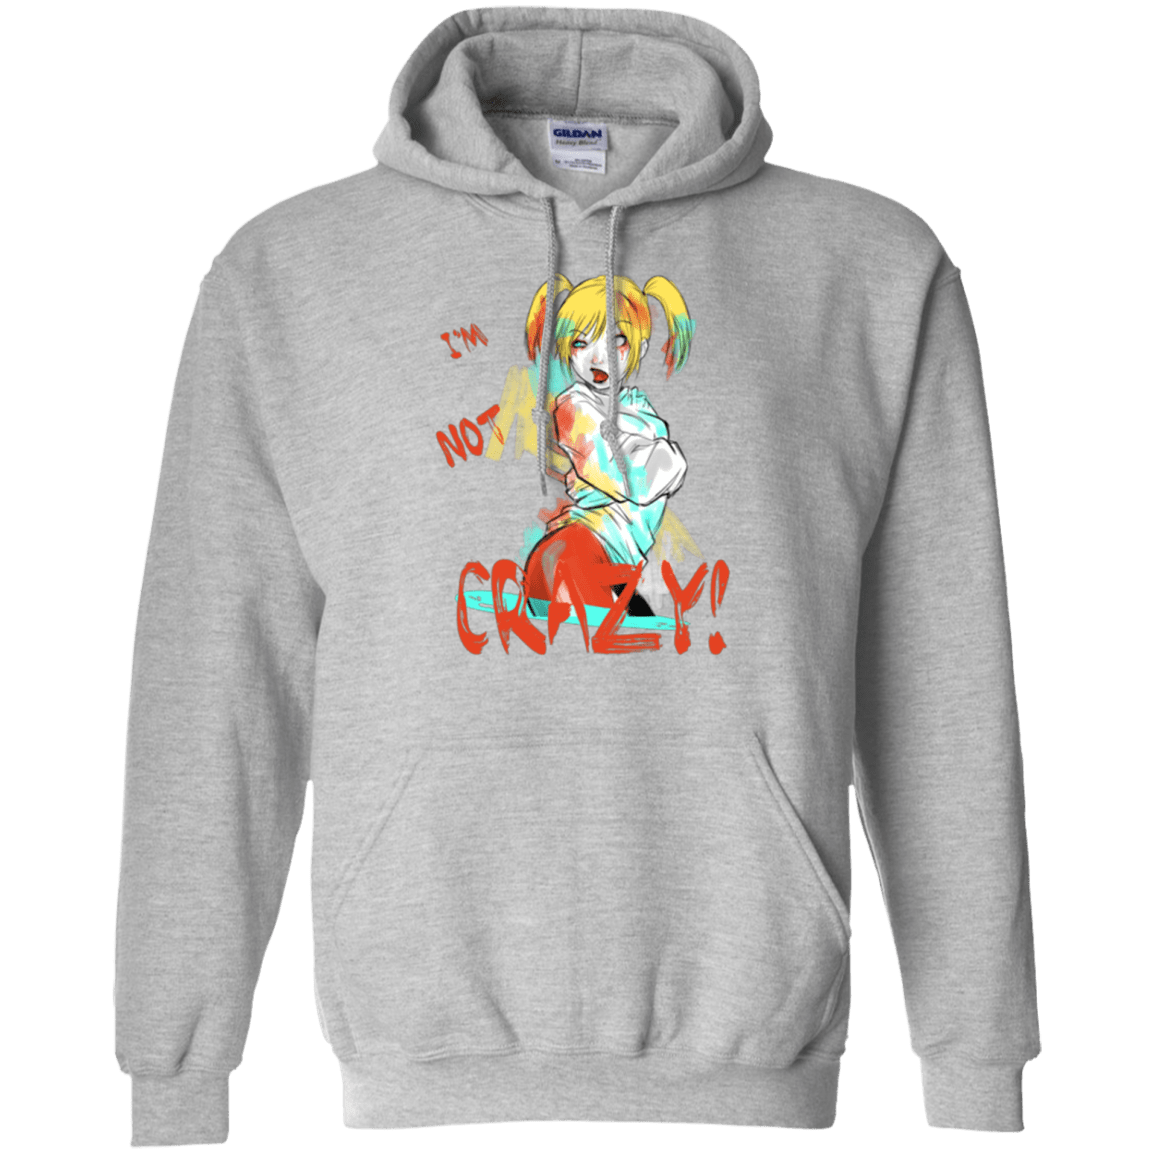 Sweatshirts Sport Grey / Small I'm not crazy! Pullover Hoodie